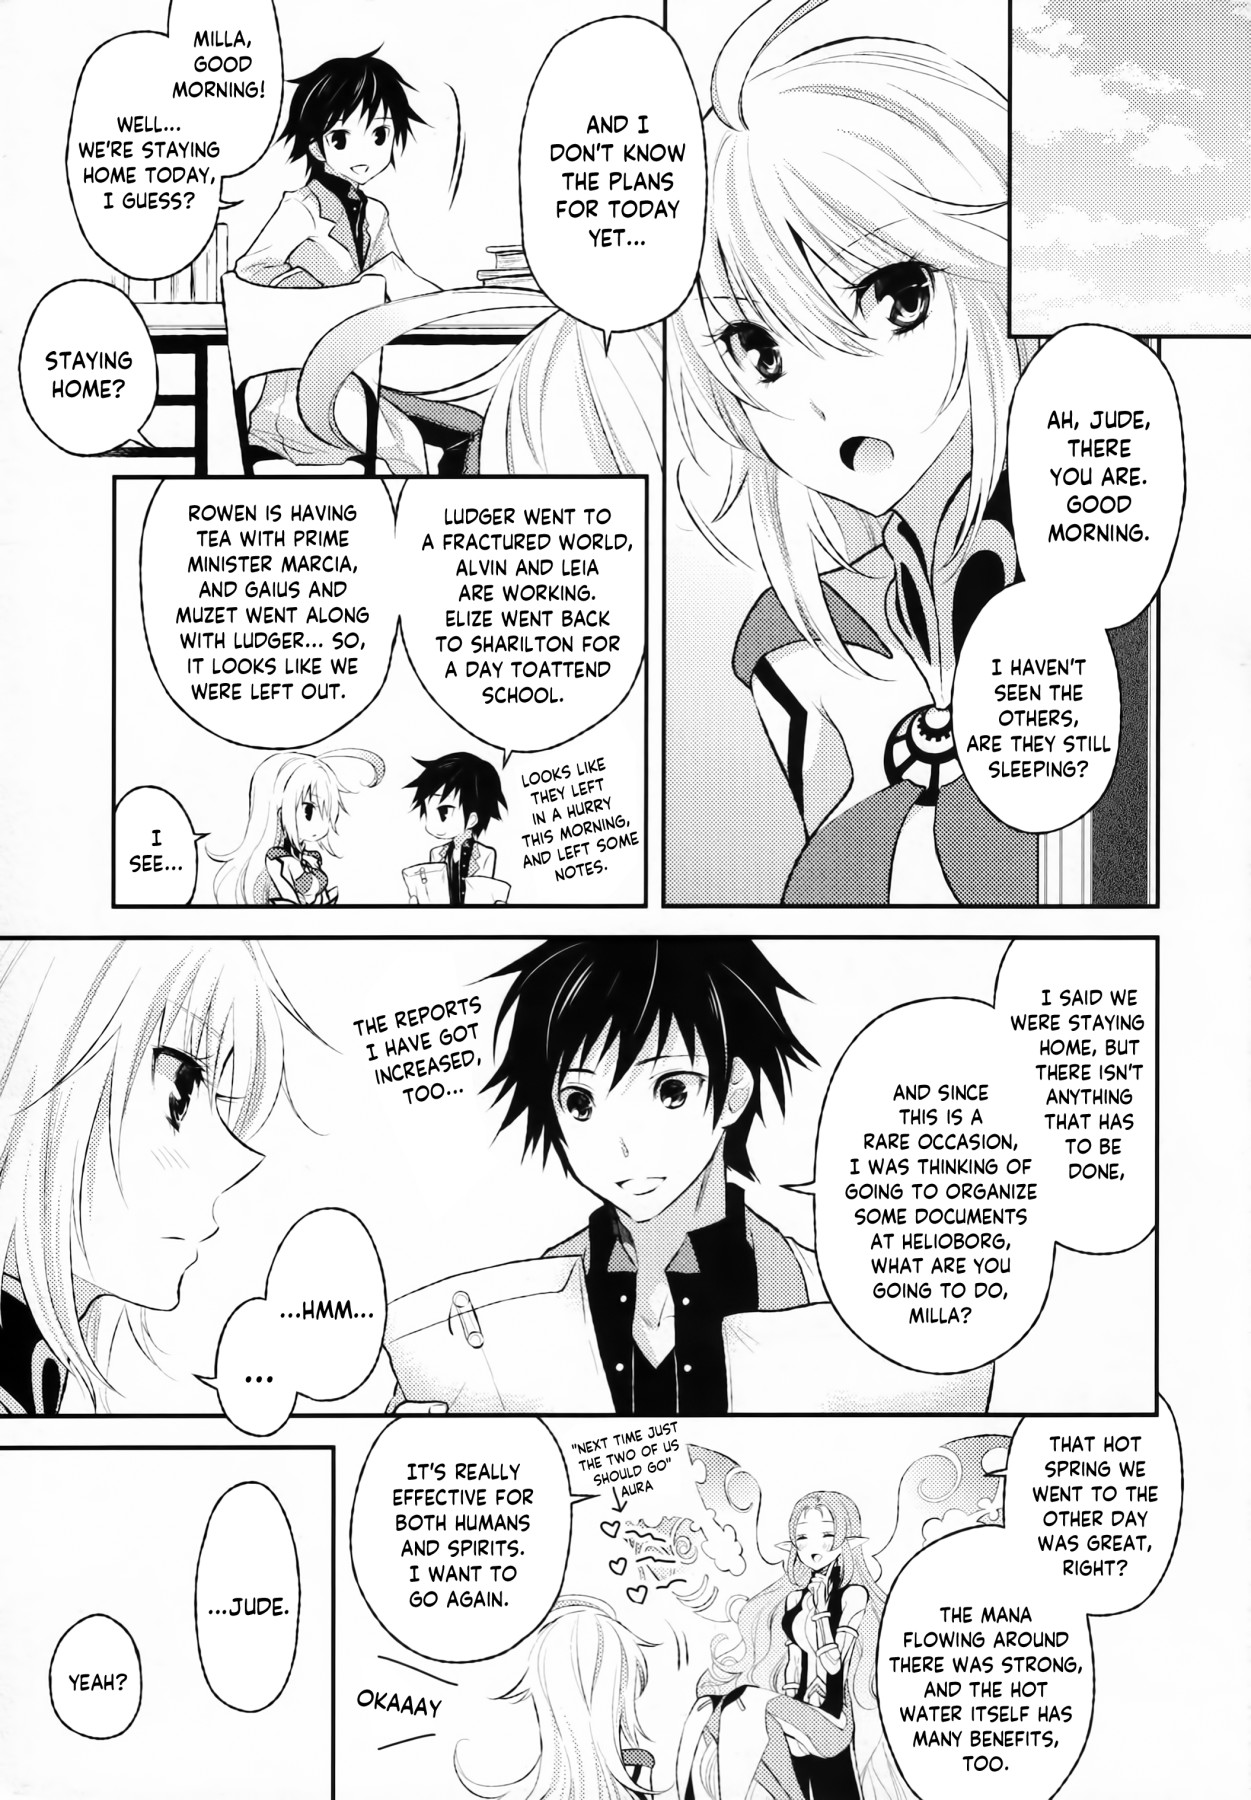 Hentai Manga Comic-How To Give a Reward - Hot Spring Edition-Read-2